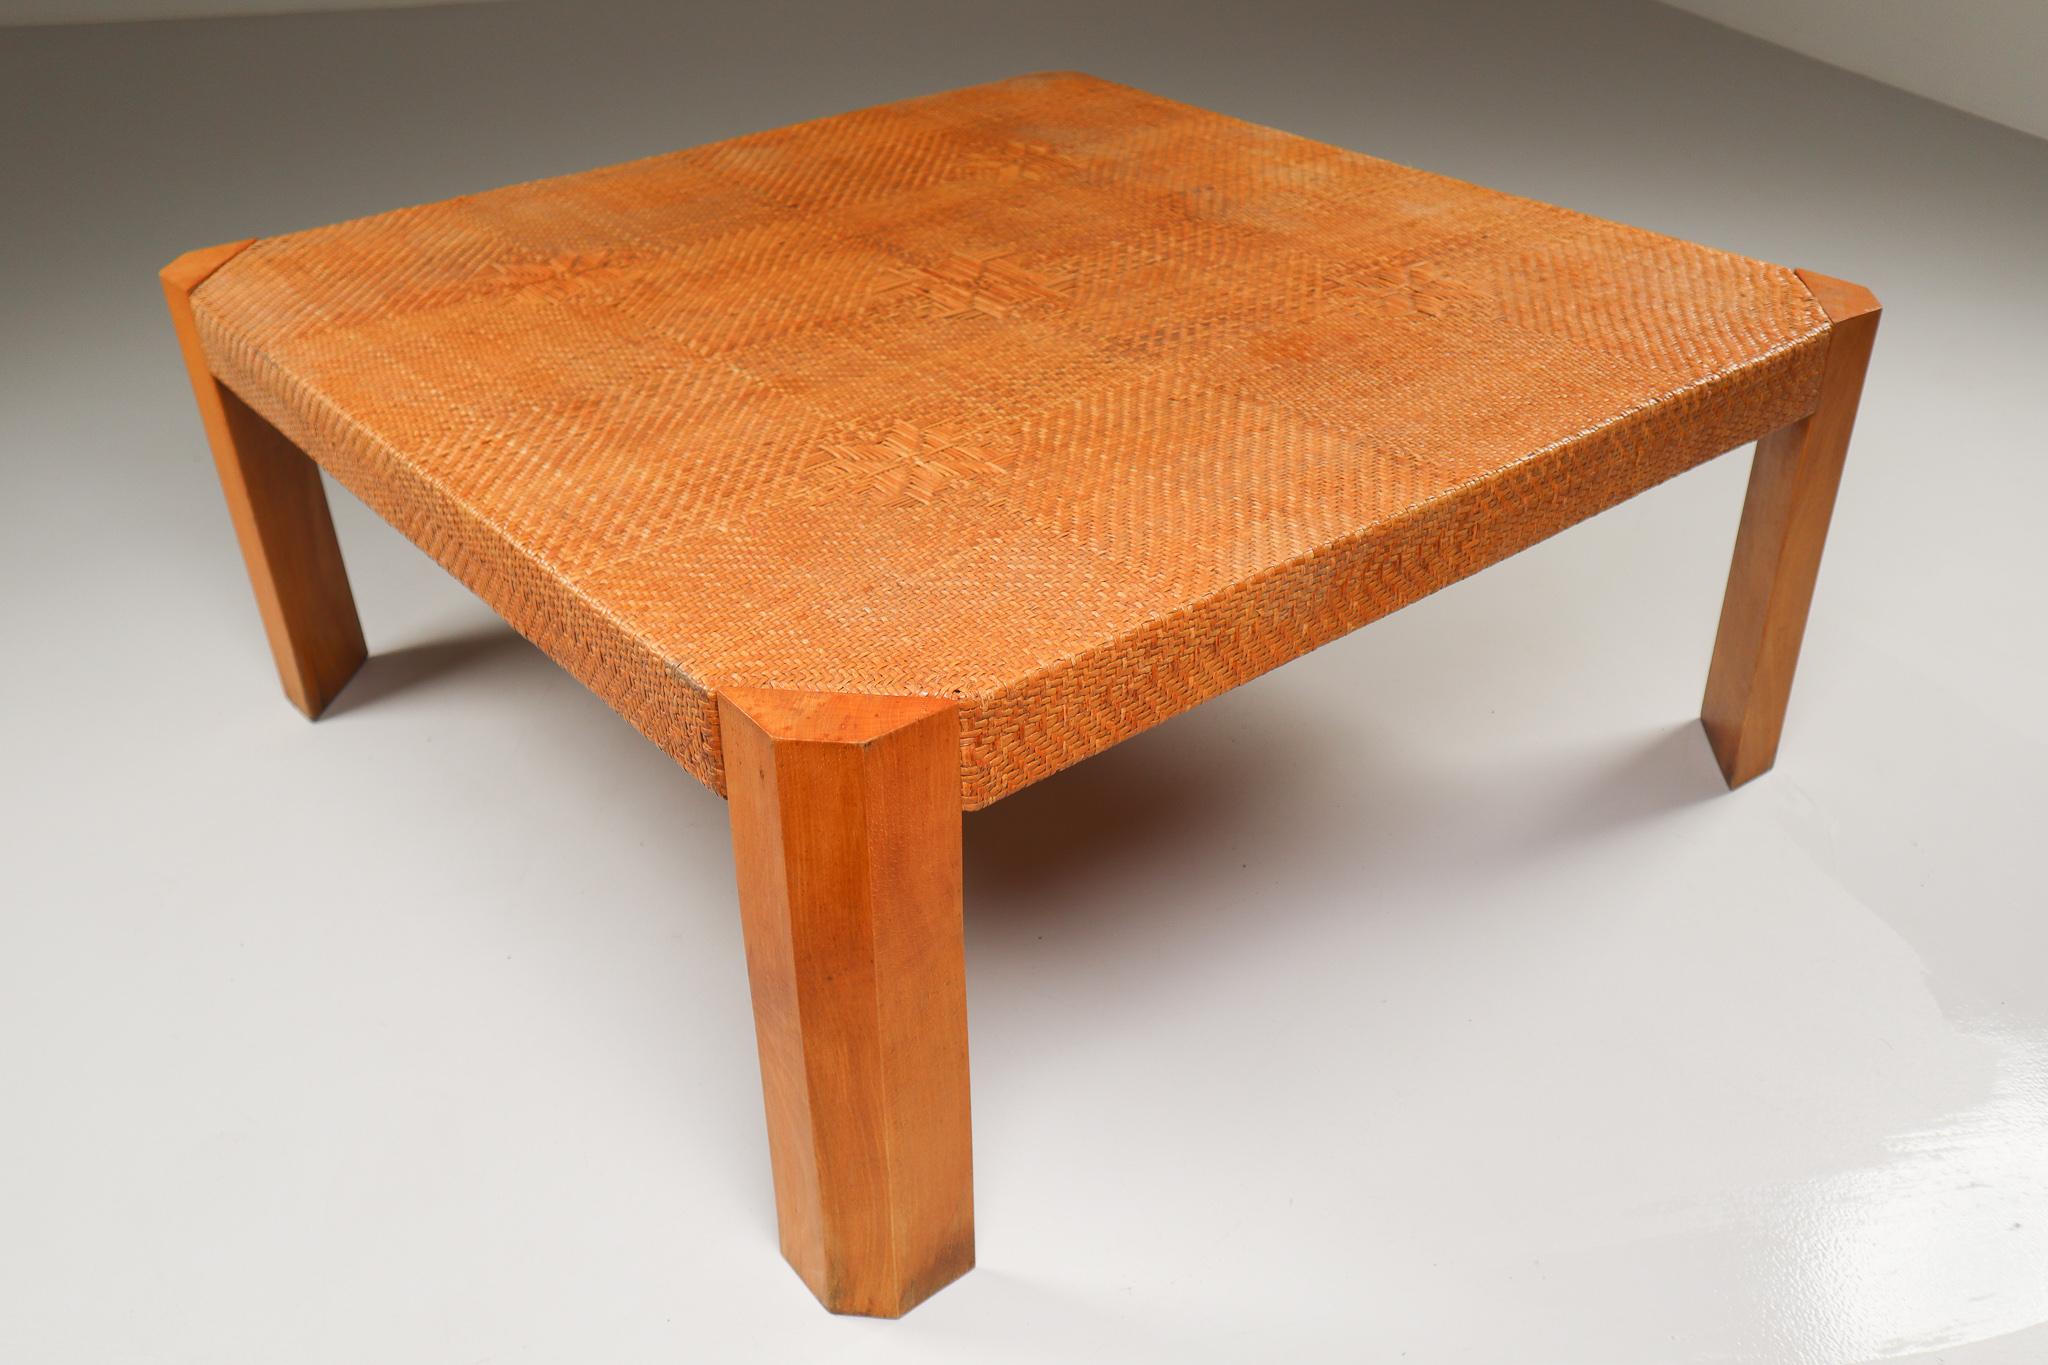 Late 20th Century Modern Monumental Rattan and Wood Coffee Table, Mid-20th Century